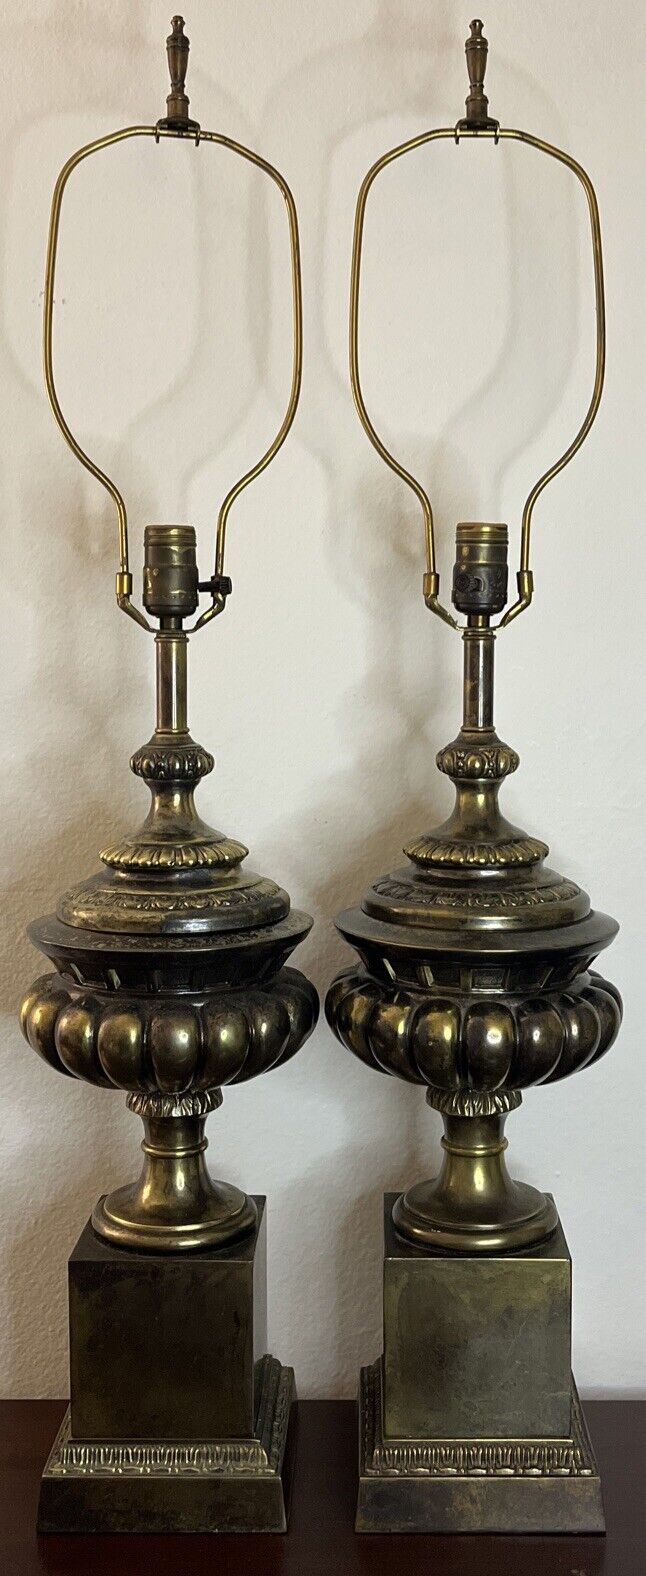 Pair of Large Vintage Frederick Cooper Gold-Tone Urn-Style Table Lamps